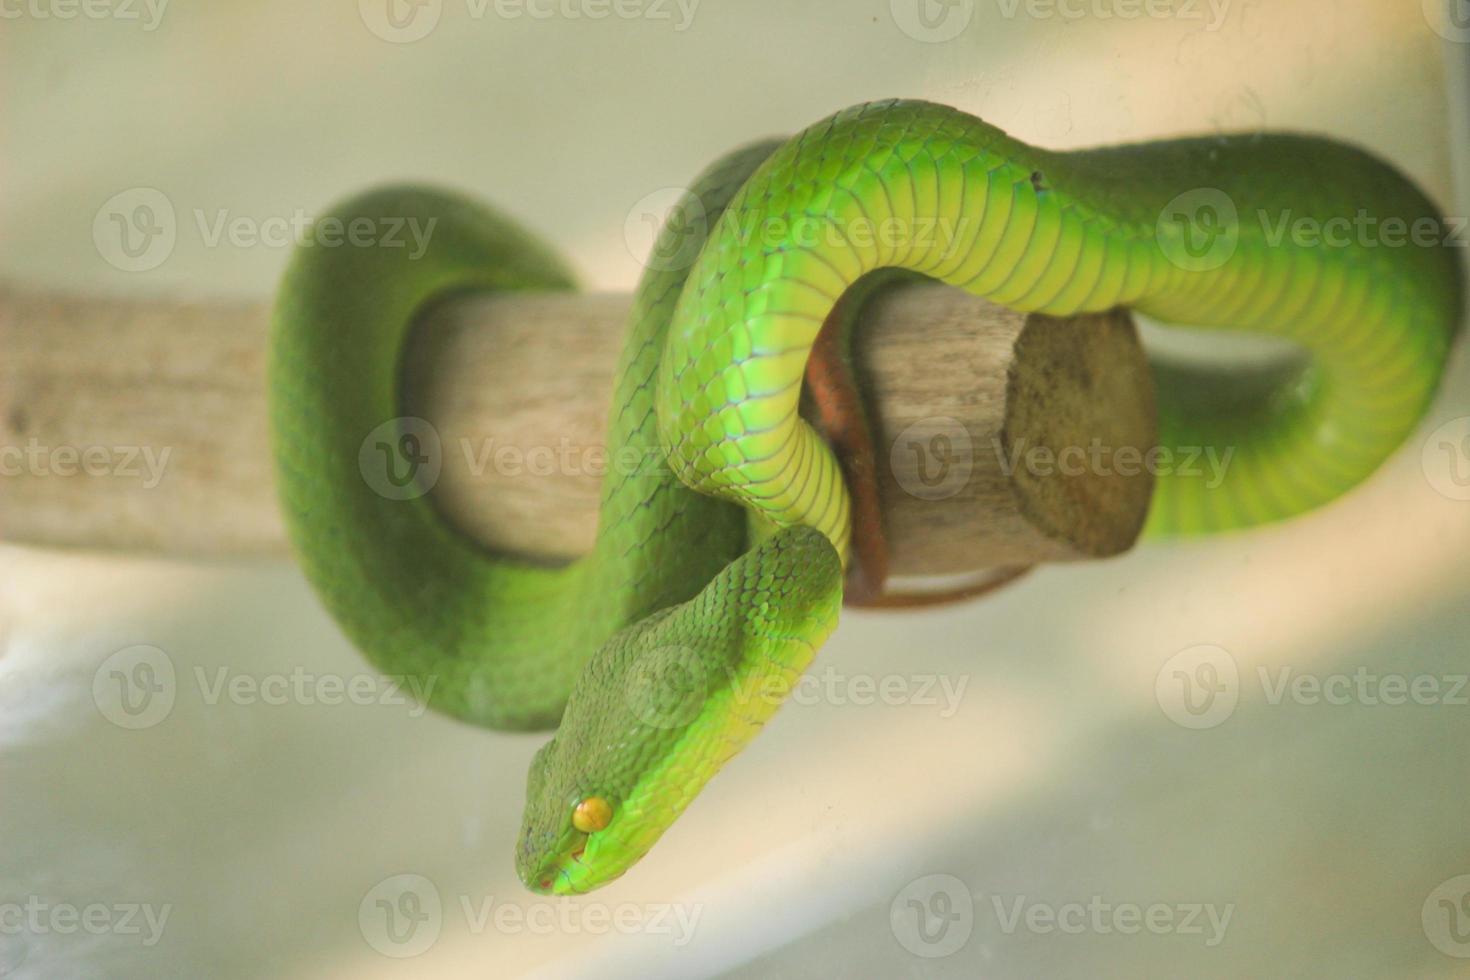 a snake named sea carcass, also commonly known as a green viper is a type of dangerous venomous snake. Has the scientific name Trimeresurus albolabris photo